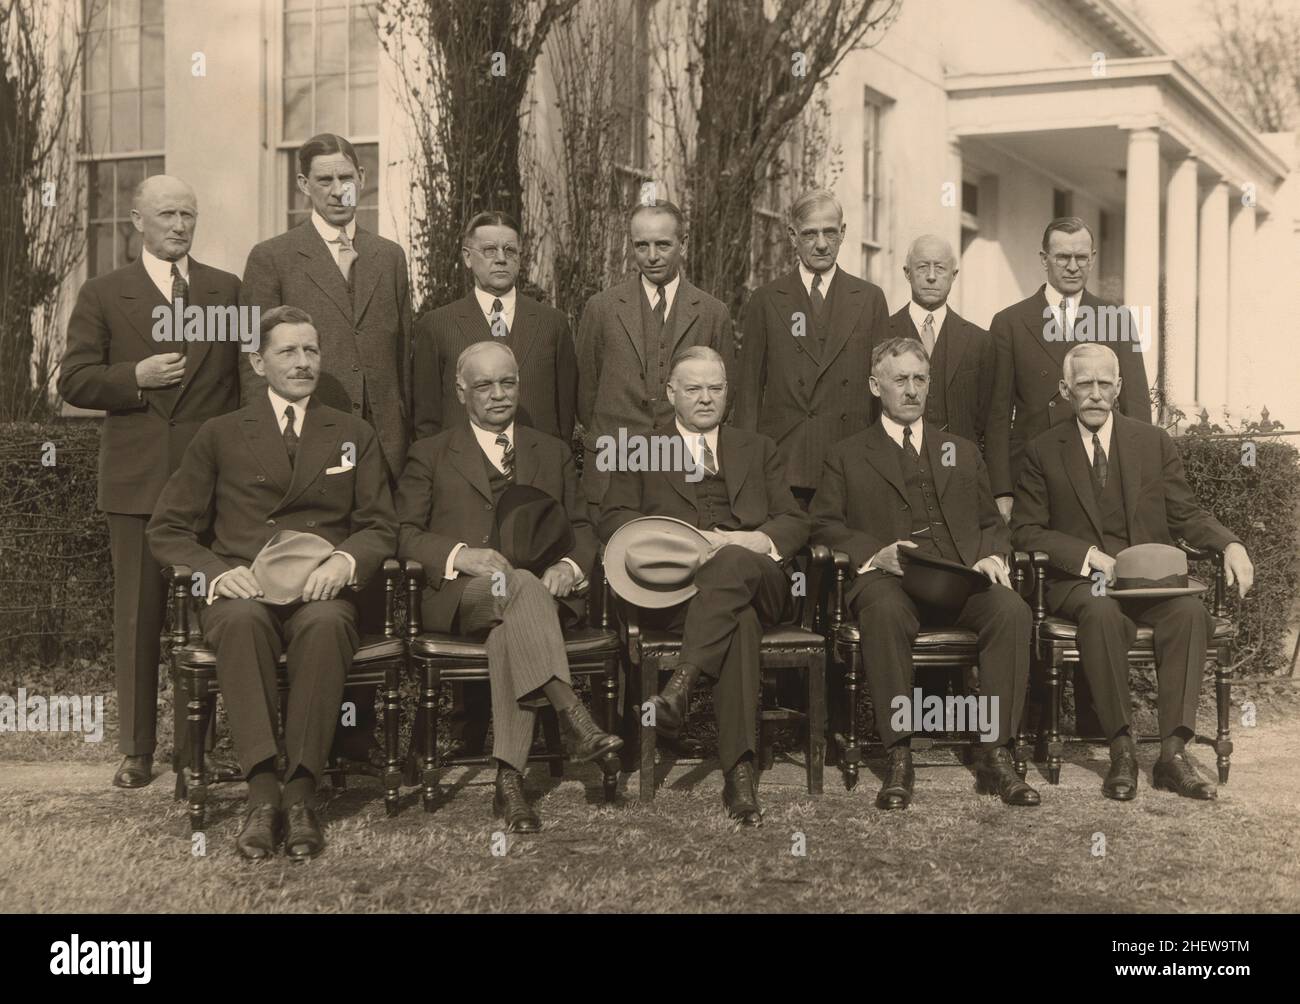 U.S. President Herbert Hoover (seated, center) with his Cabinet (l-r standing) Robert Lamont, Ray Wilbur, Walter Brown, William Mitchell, Arthur Hyde, Charles Adams III, William Doak, (l-r seated) Patrick Hurley, Charles Curtis, Henry Stimson, Andrew Mellon, White House, Washington DC, USA, Harris & Ewing, 1930 Stock Photo